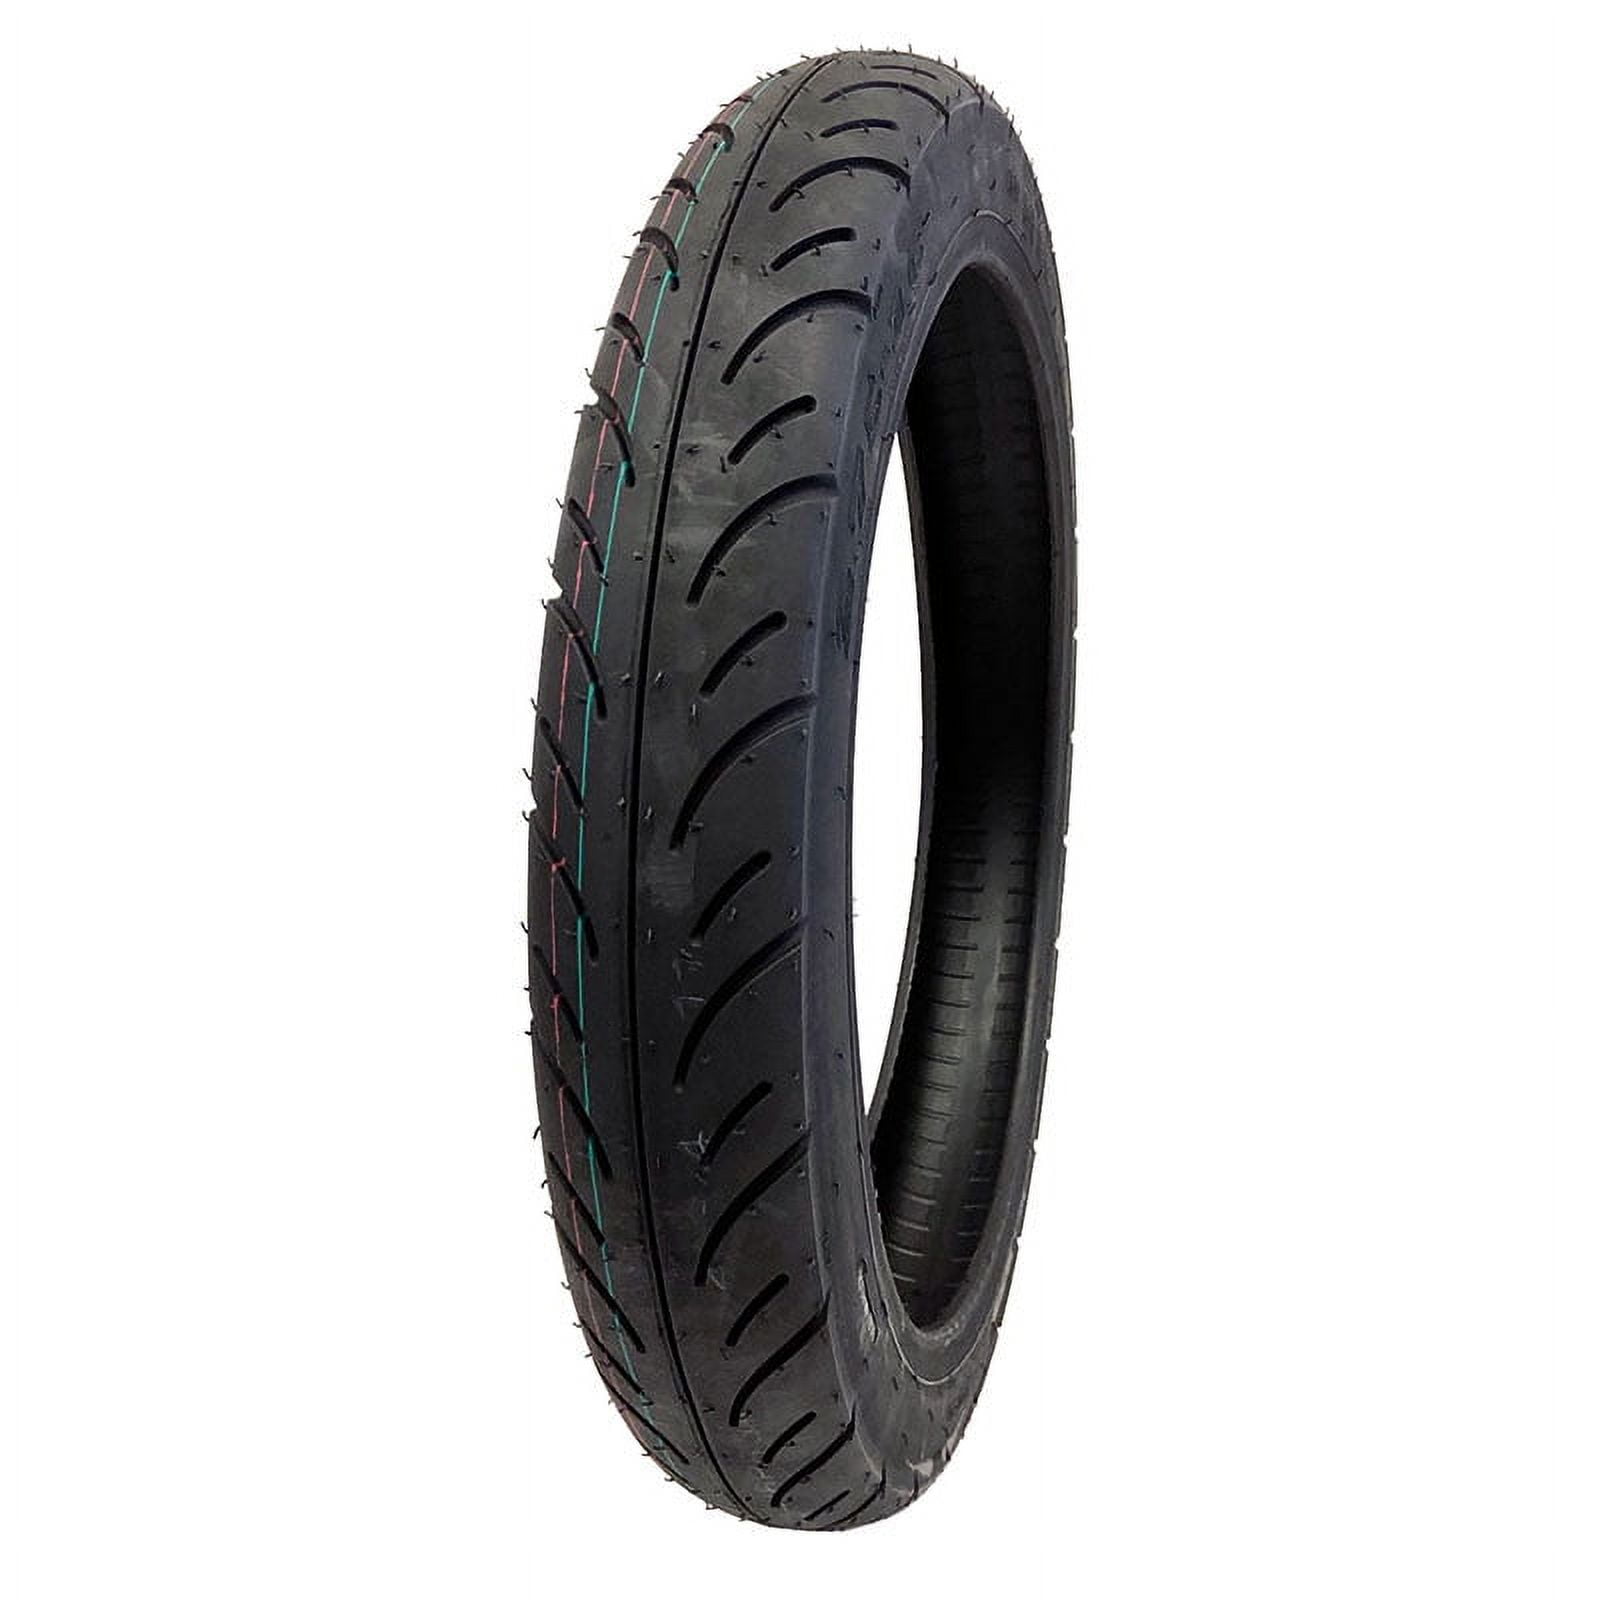 Beast Tire Titan S32 140/70-13 TL Tubeless Motorcycle Tires Maximum safety  with maximum performance | Shopee Philippines